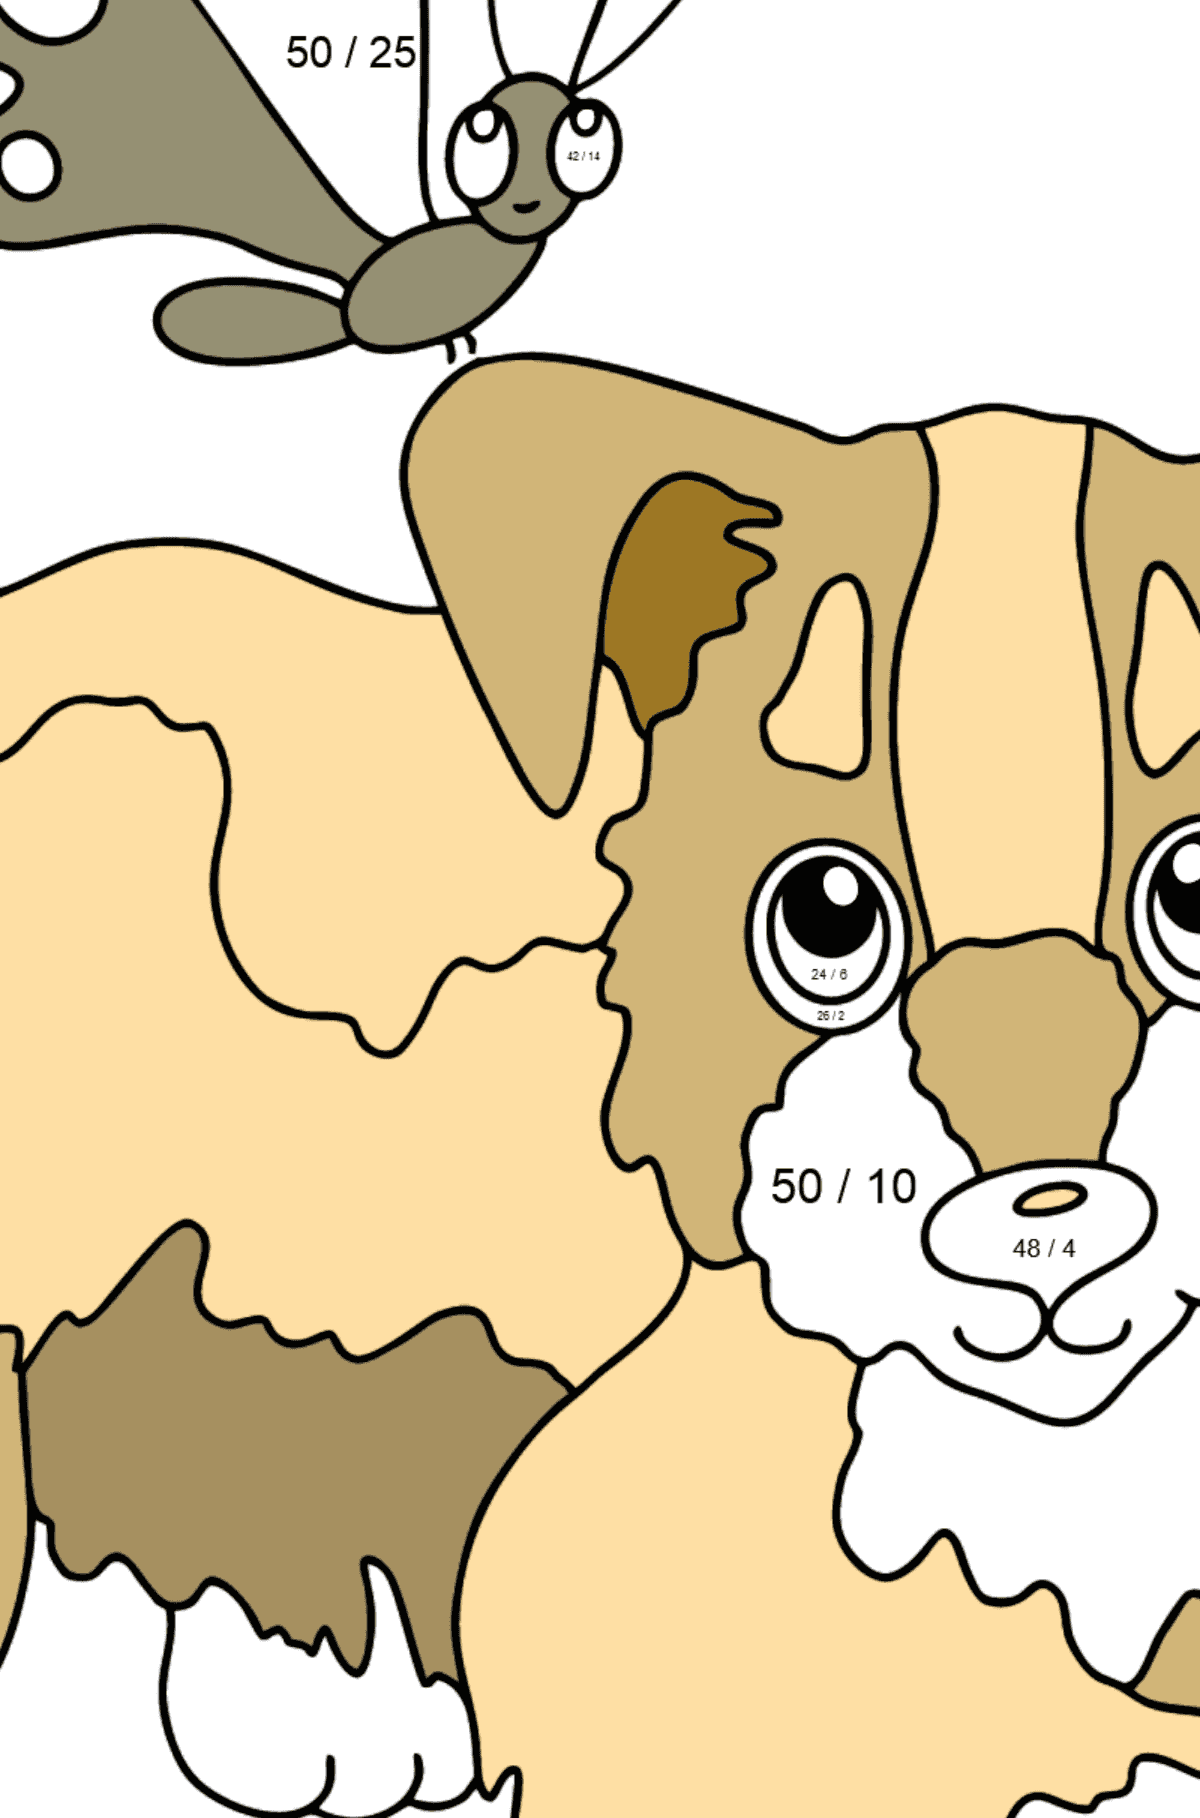 Coloring Page - A Dog is Playing with a Beautiful Butterfly - Math Coloring - Division for Kids